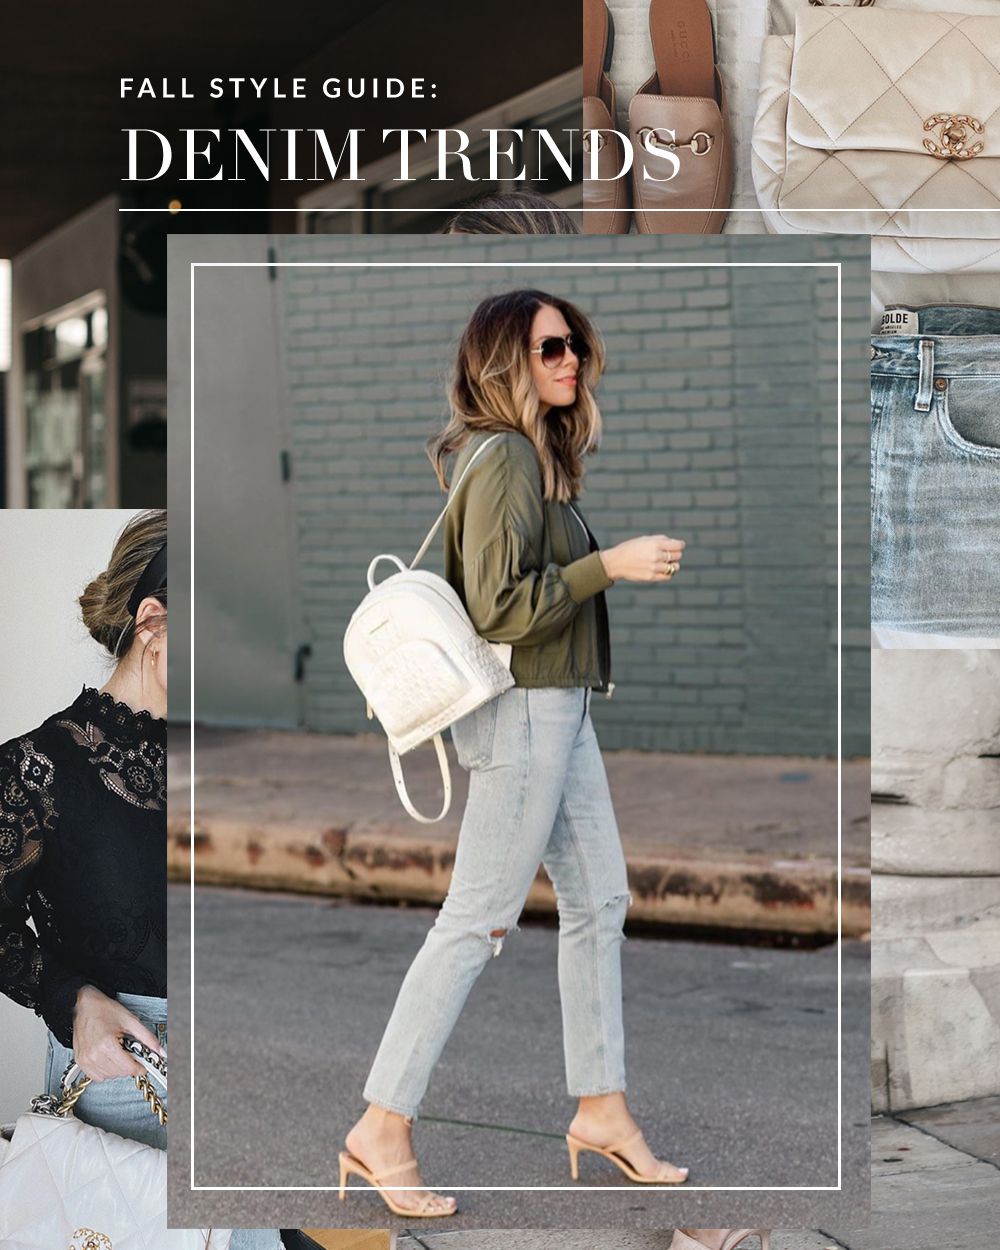 FALL STYLE GUIDE: Denim Trends